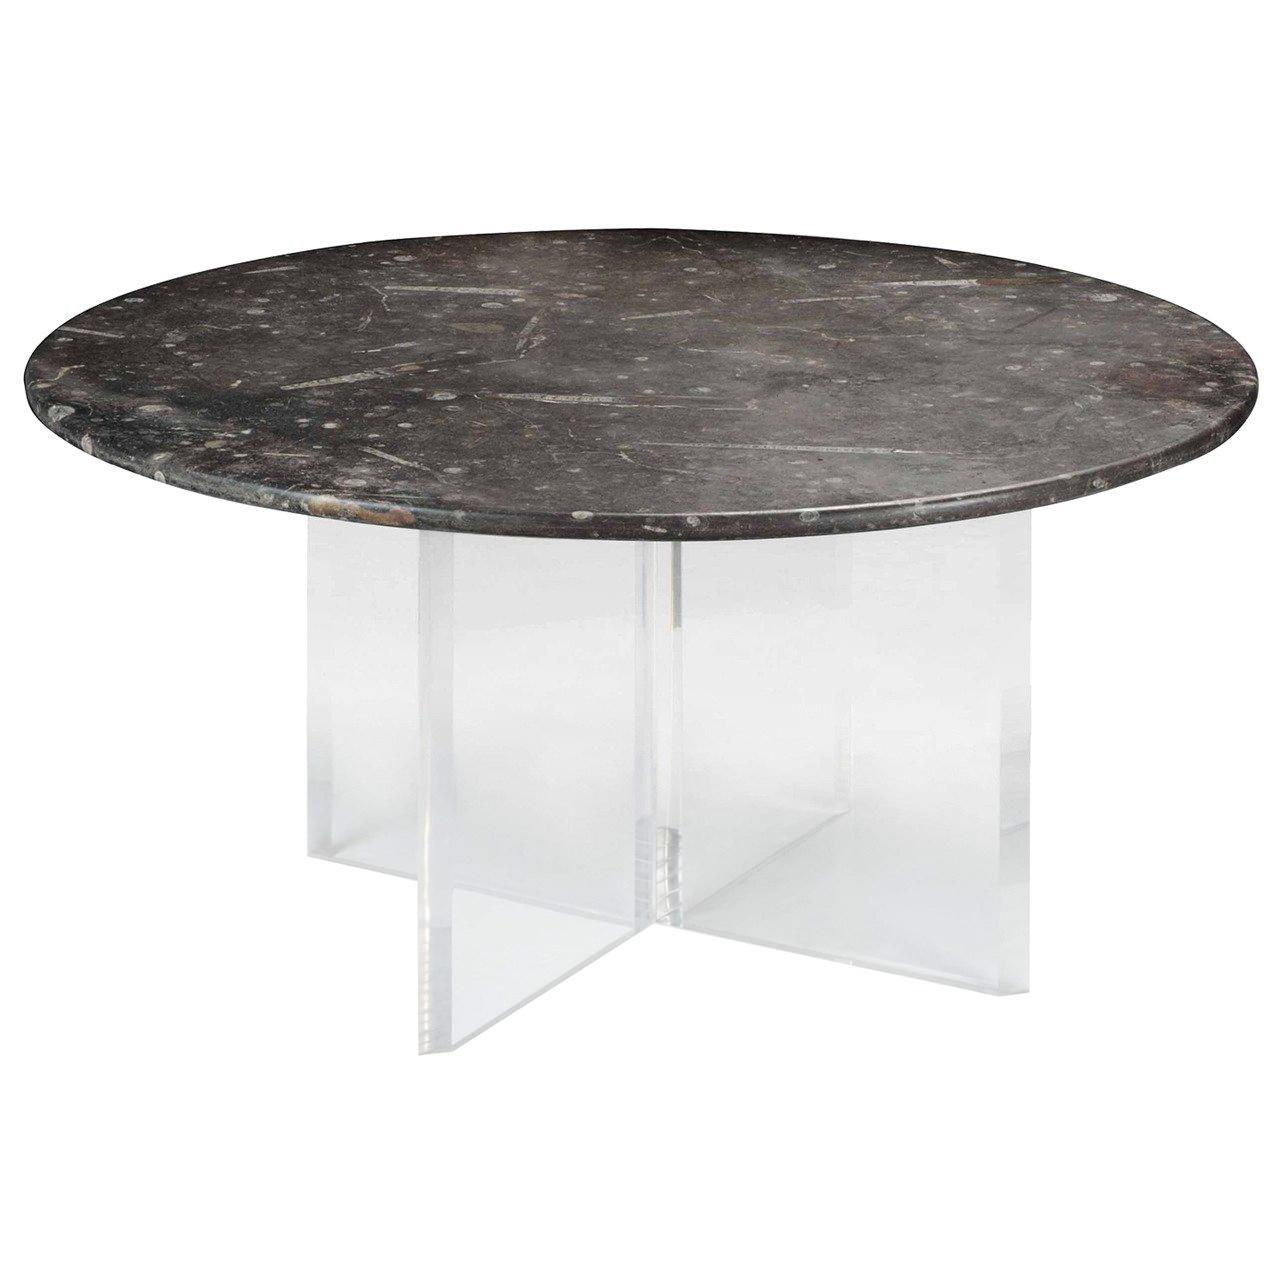 Exceptional Large 19th Century Marble Table Top For Sale